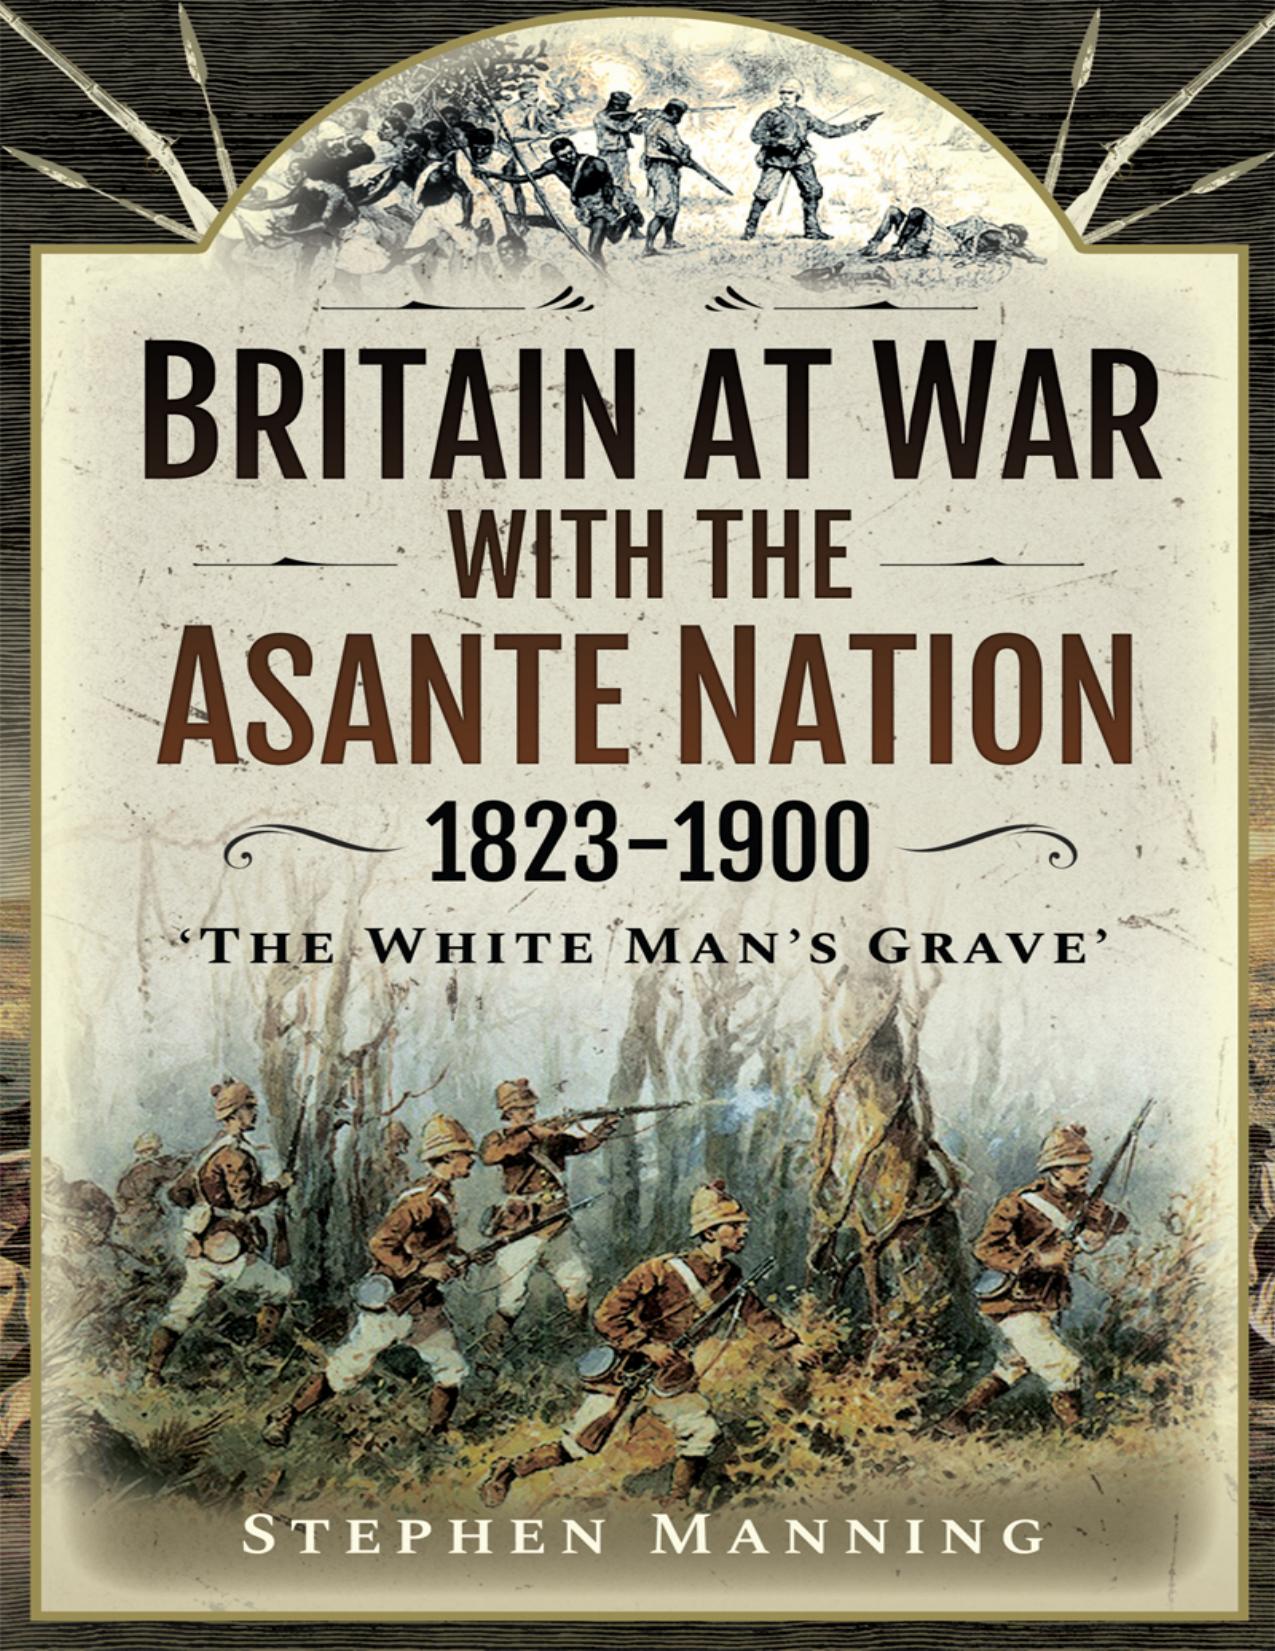 Britain at War with the Asante Nation 1823-1900 by Stephen Manning